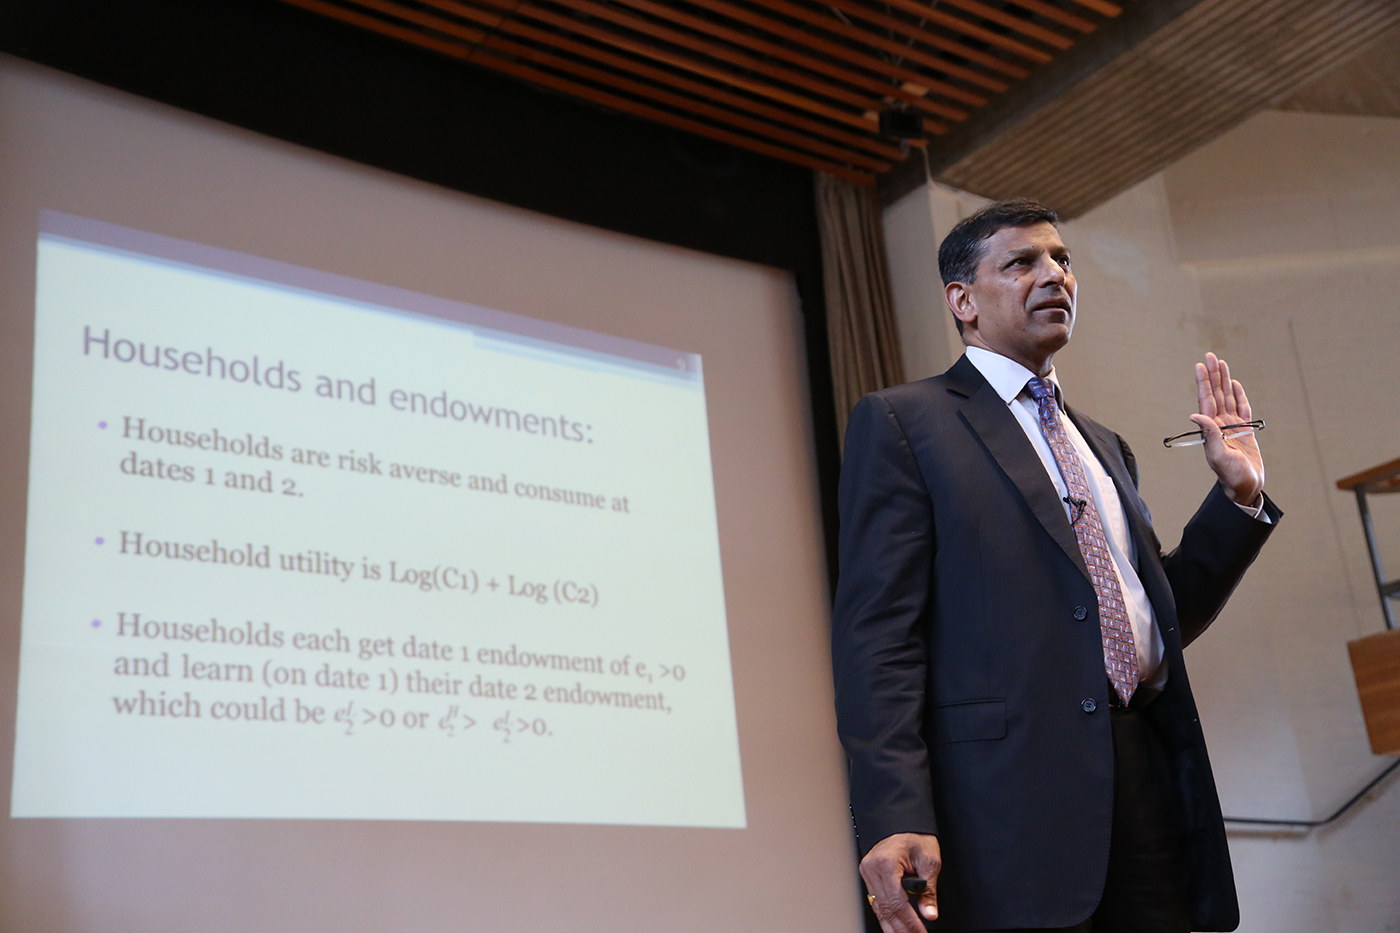 Marshall Lecture 2015/2016 - Professor Raghuram Rajan - "Banks, Central Banking and Crises" Q+A Session's image